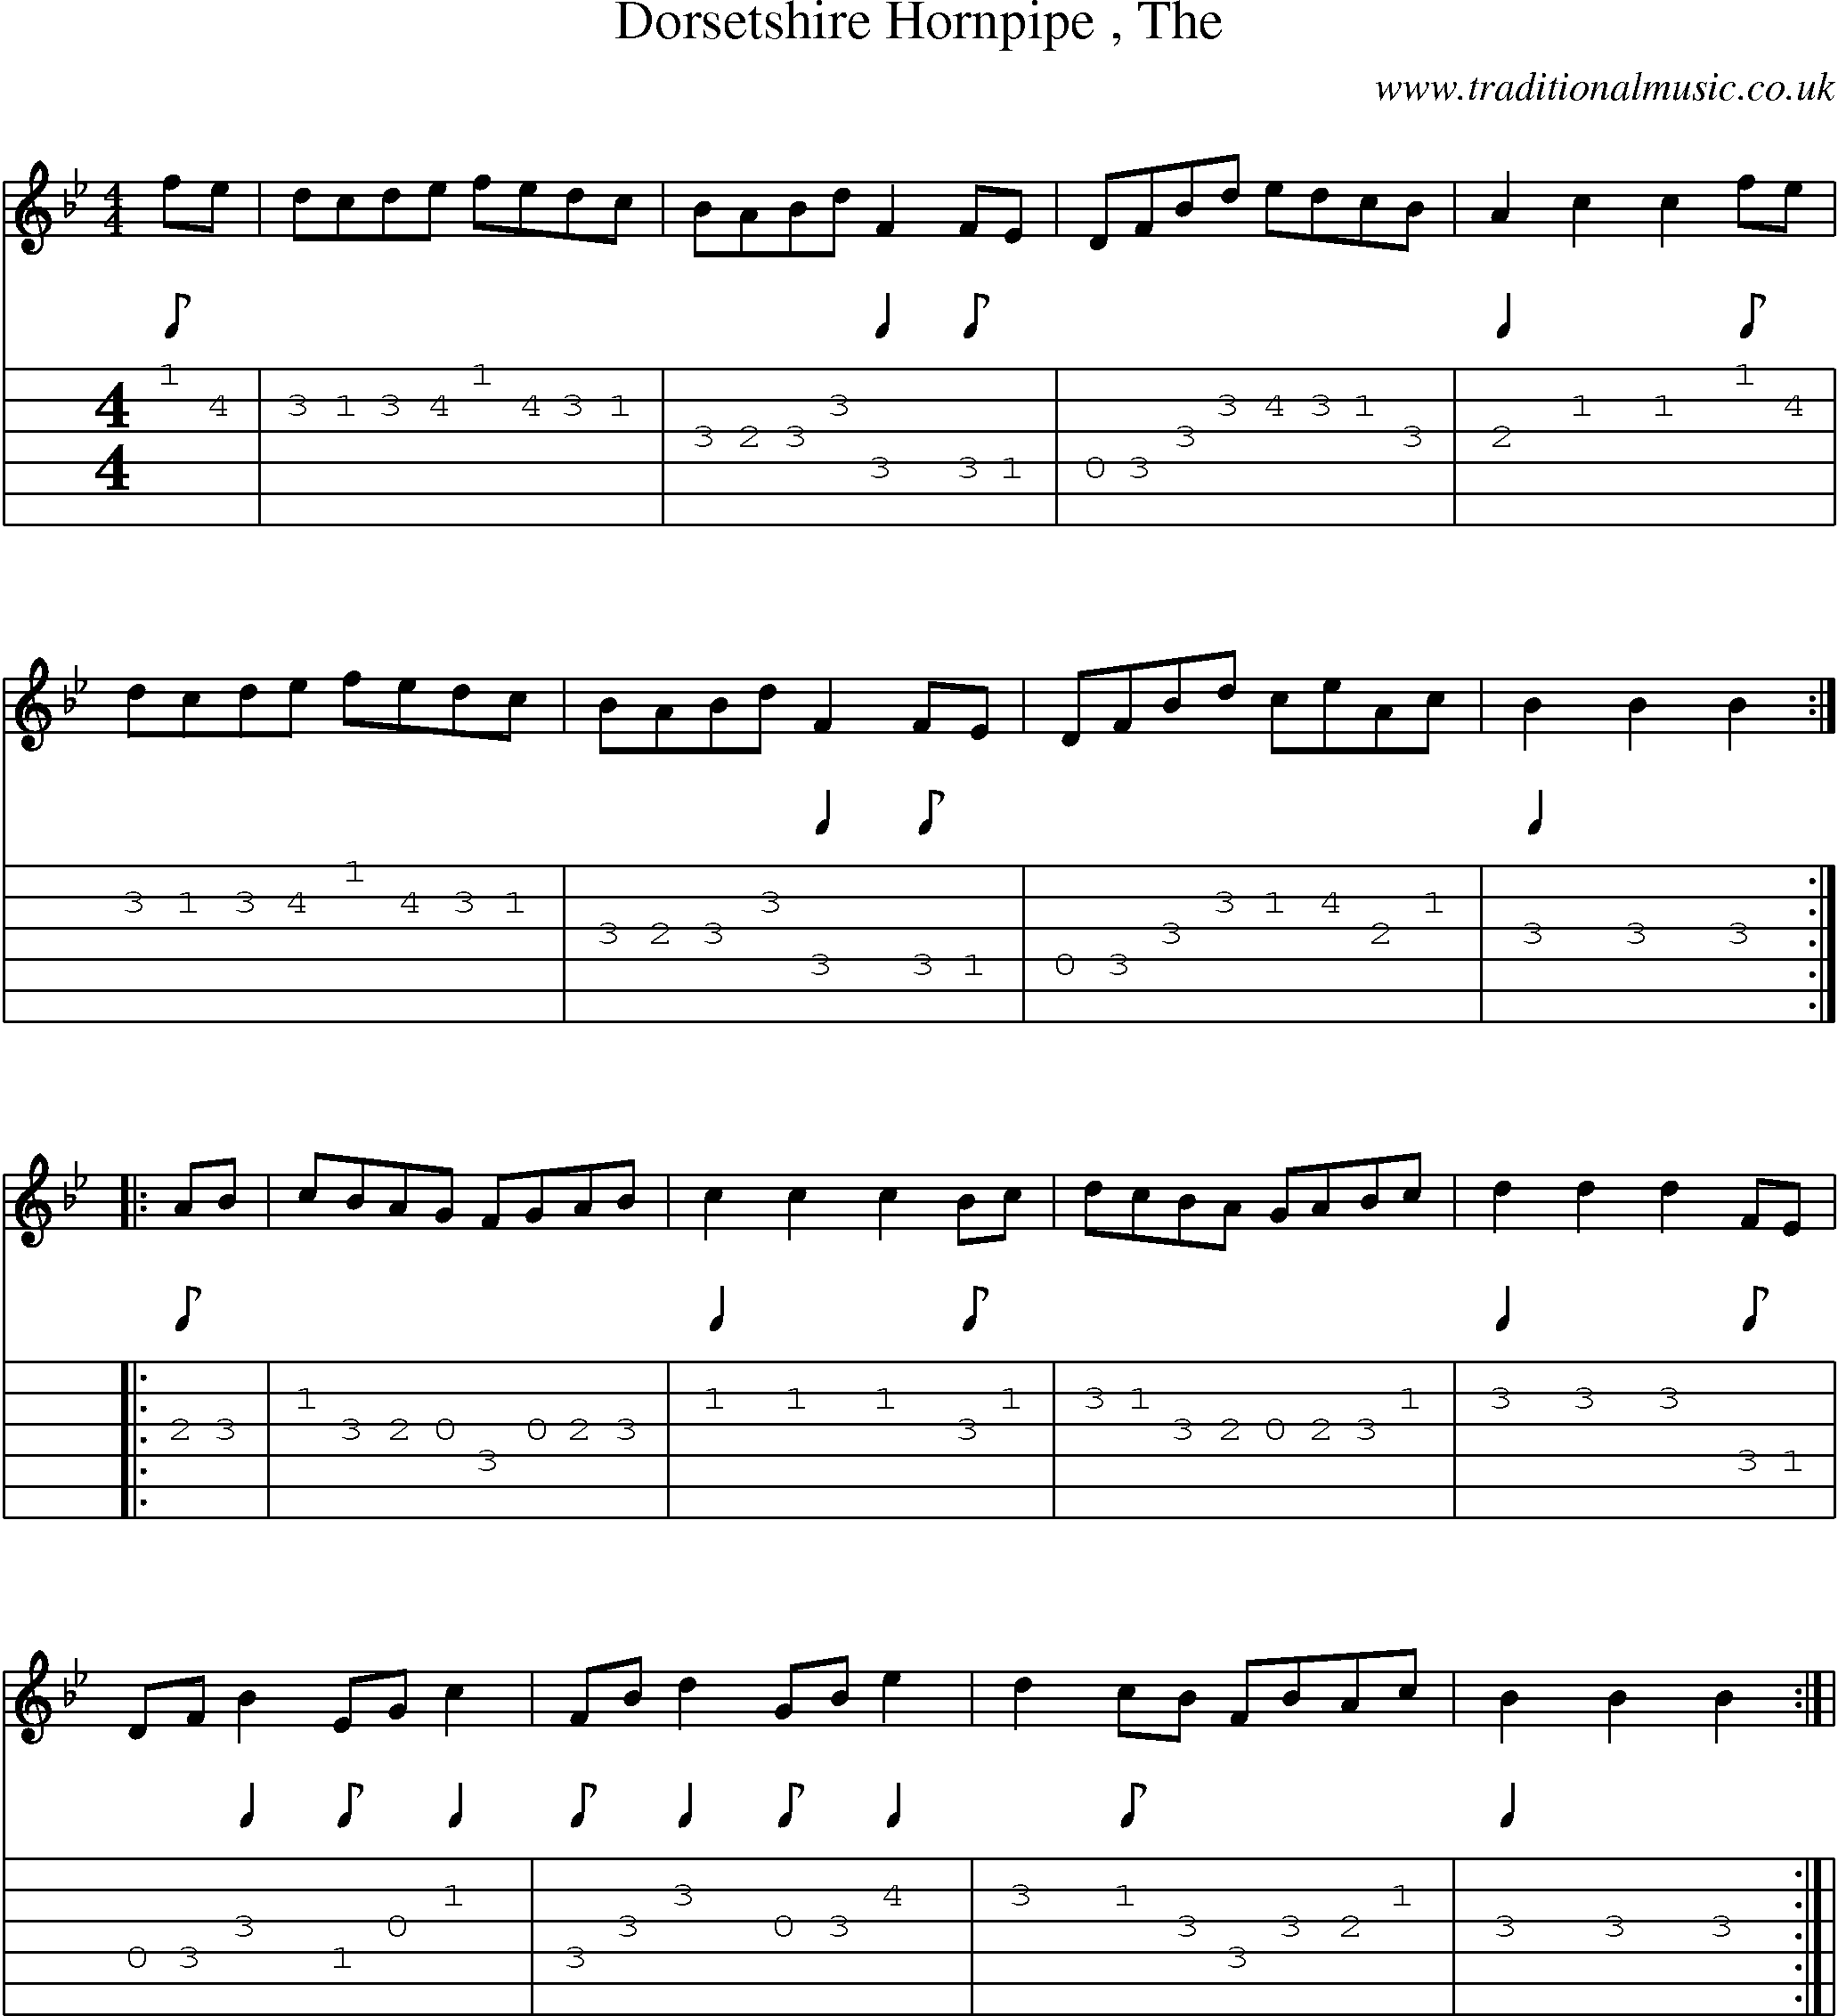 Music Score and Guitar Tabs for Dorsetshire Hornpipe